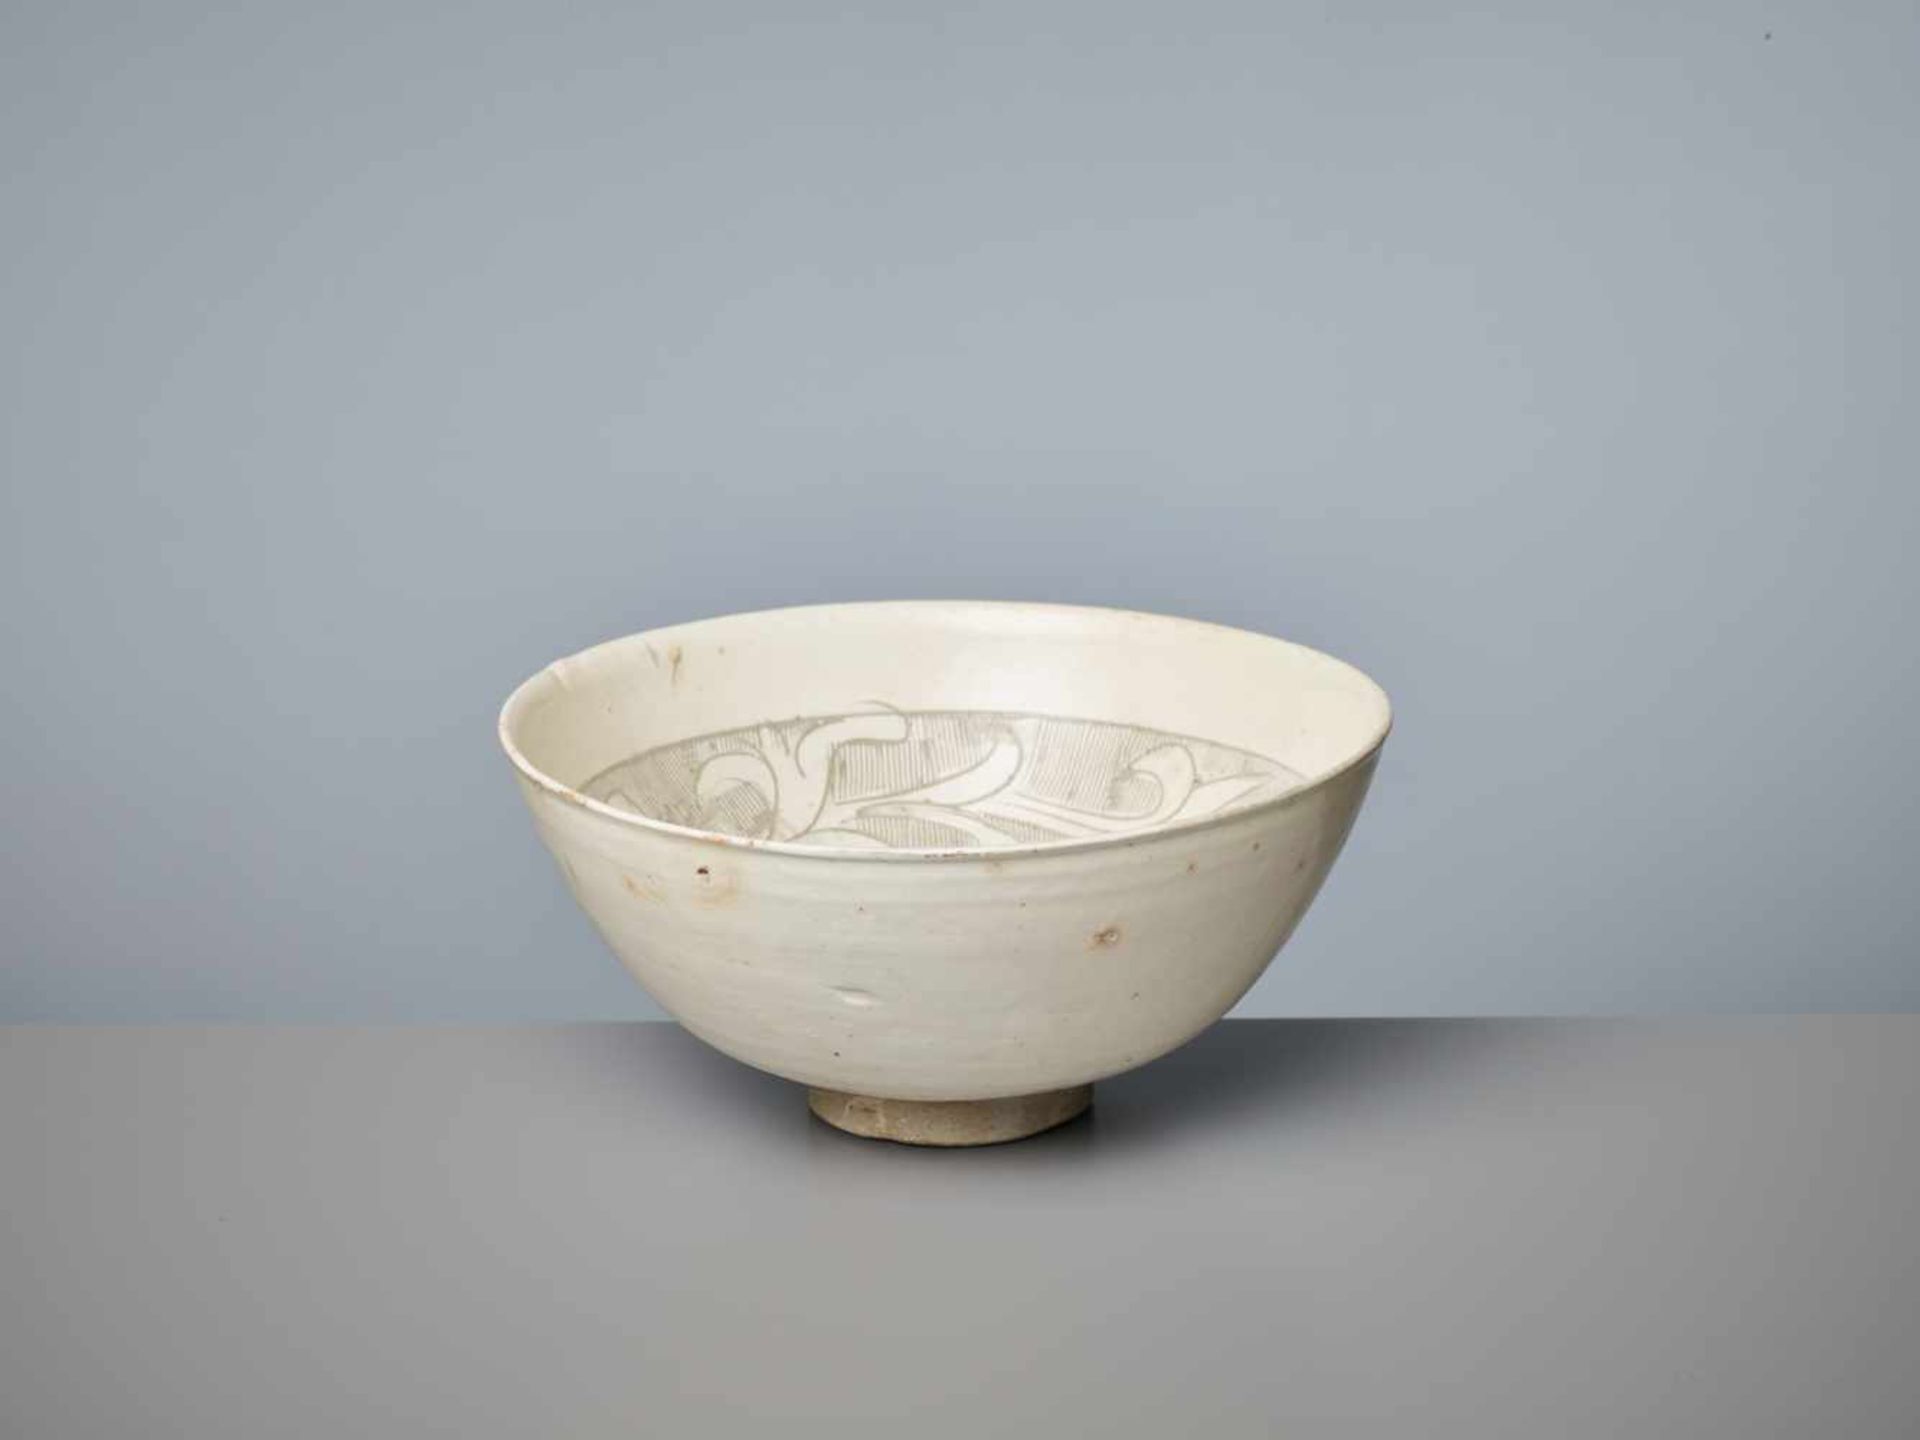 A CIZHOU ‘LOTUS AND CHRYSANTHEMUM’ SGRAFFIATO BOWL, 13TH – 14TH CENTURY PUBLISHED: Song Ceramics, - Image 3 of 8